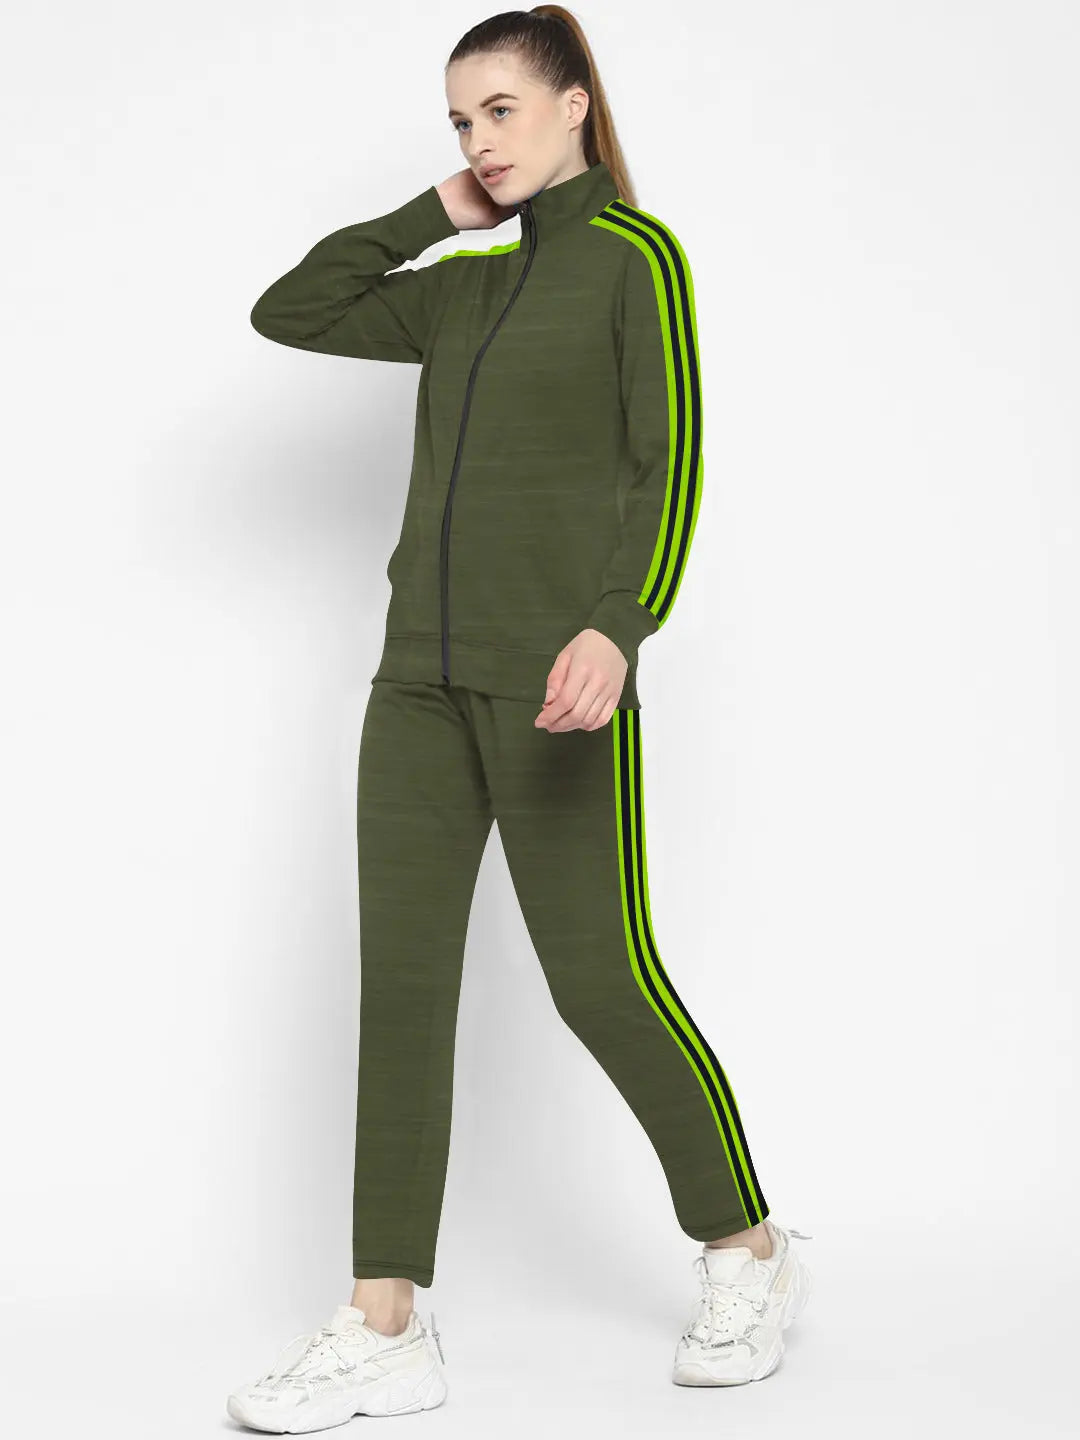 Louis Vicaci Fleece Zipper Tracksuit For Ladies Olive Green Melange with Lime Green Stripe-SP241